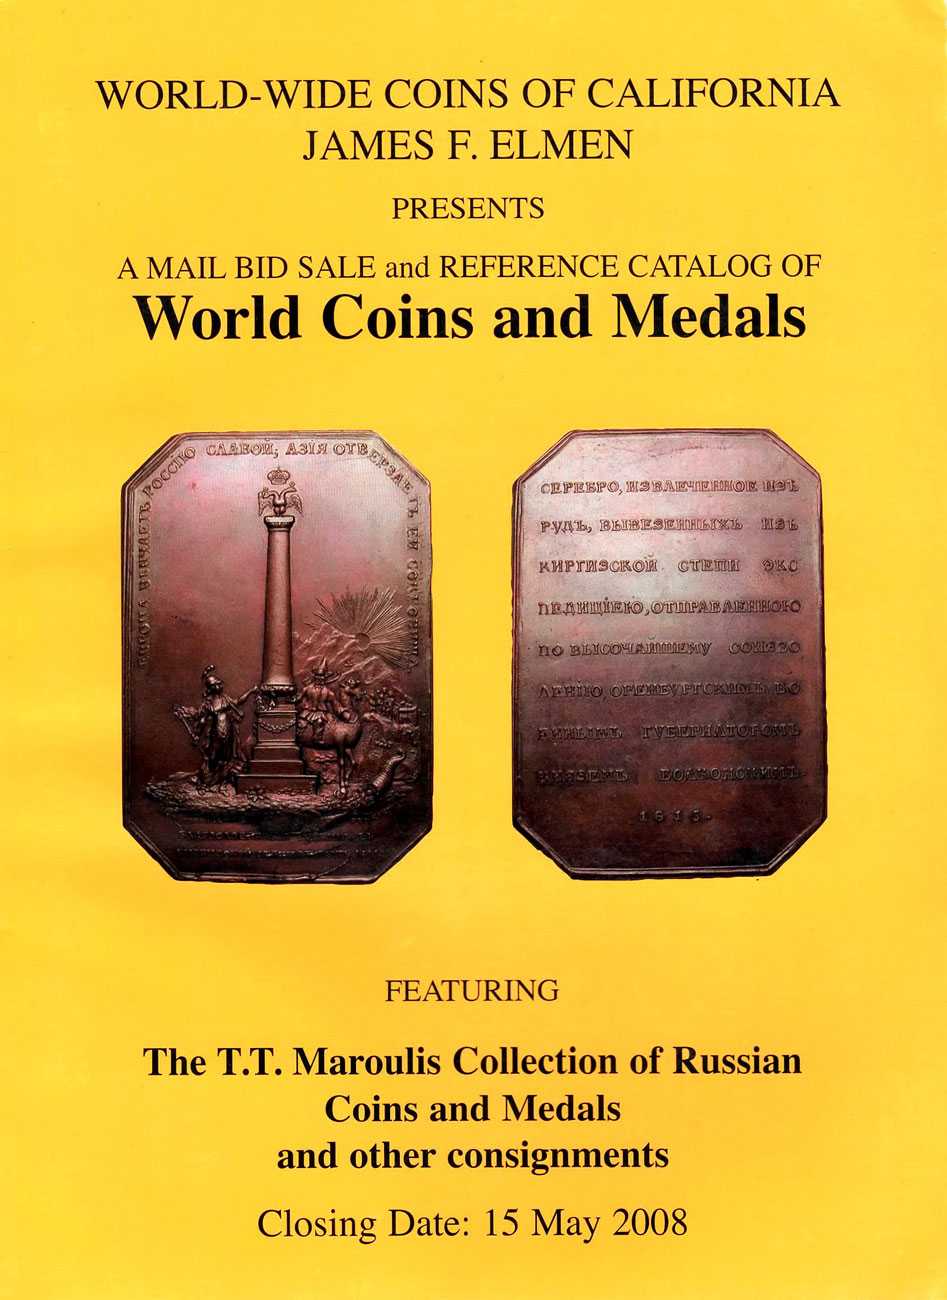 Лот №797, James F. Elmen, Санта Роза, Каталог аукциона 15 мая 2008 года. The T.T. Maroulis Collection of Russian Coins and Medals..